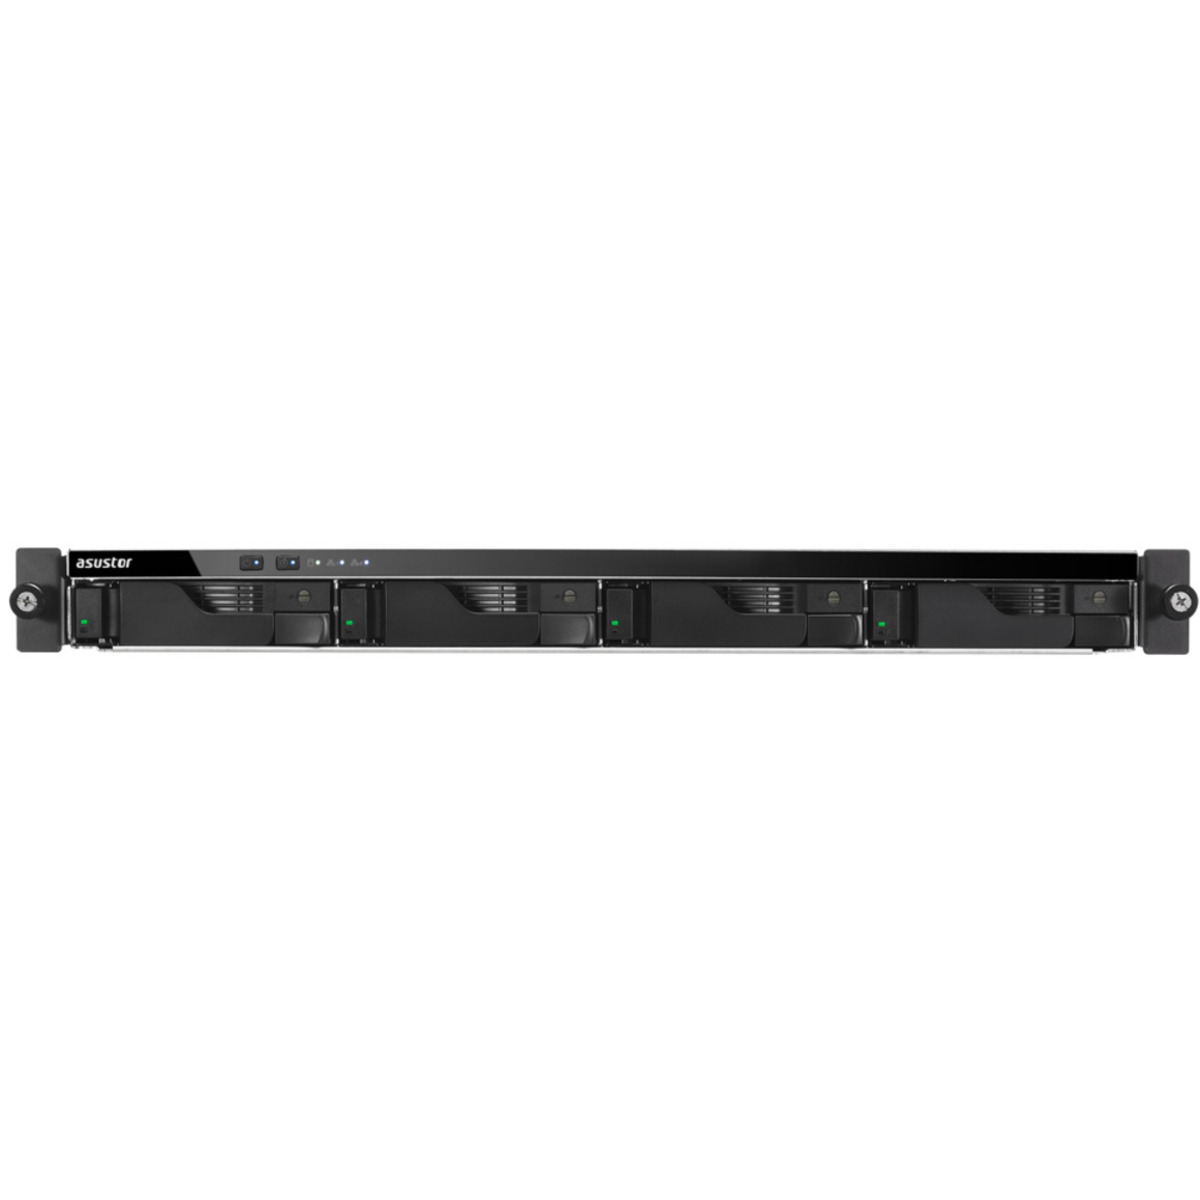 ASUSTOR LOCKERSTOR 4RD AS6504RD 60tb 4-Bay RackMount Multimedia / Power User / Business NAS - Network Attached Storage Device 3x20tb Western Digital Ultrastar HC560 WUH722020ALE6L4 3.5 7200rpm SATA 6Gb/s HDD ENTERPRISE Class Drives Installed - Burn-In Tested - FREE RAM UPGRADE LOCKERSTOR 4RD AS6504RD